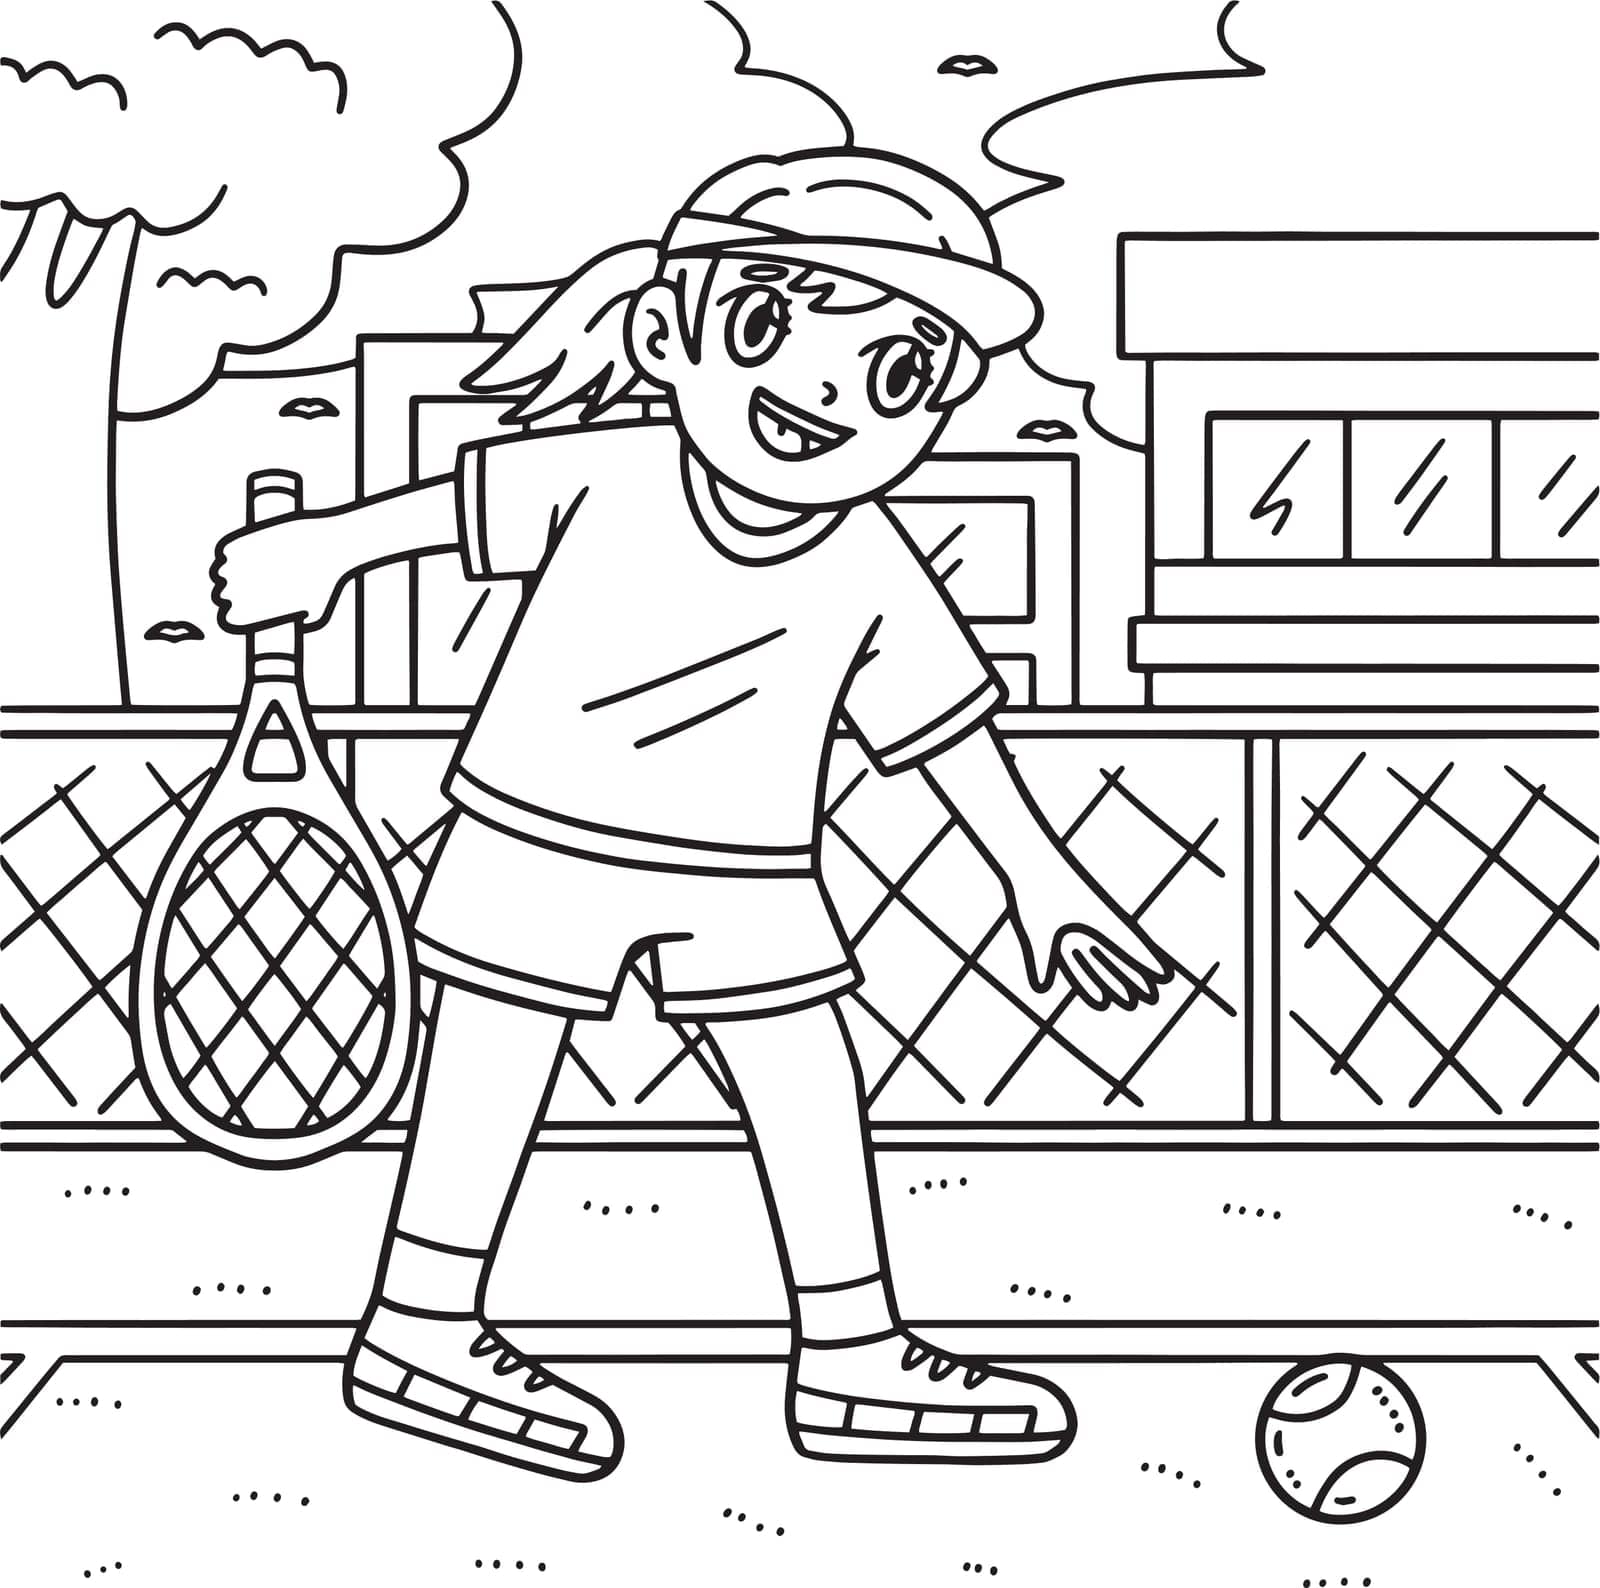 A cute and funny coloring page of a Tennis Female Player Picking a Ball. Provides hours of coloring fun for children. To color, this page is very easy. Suitable for little kids and toddlers.